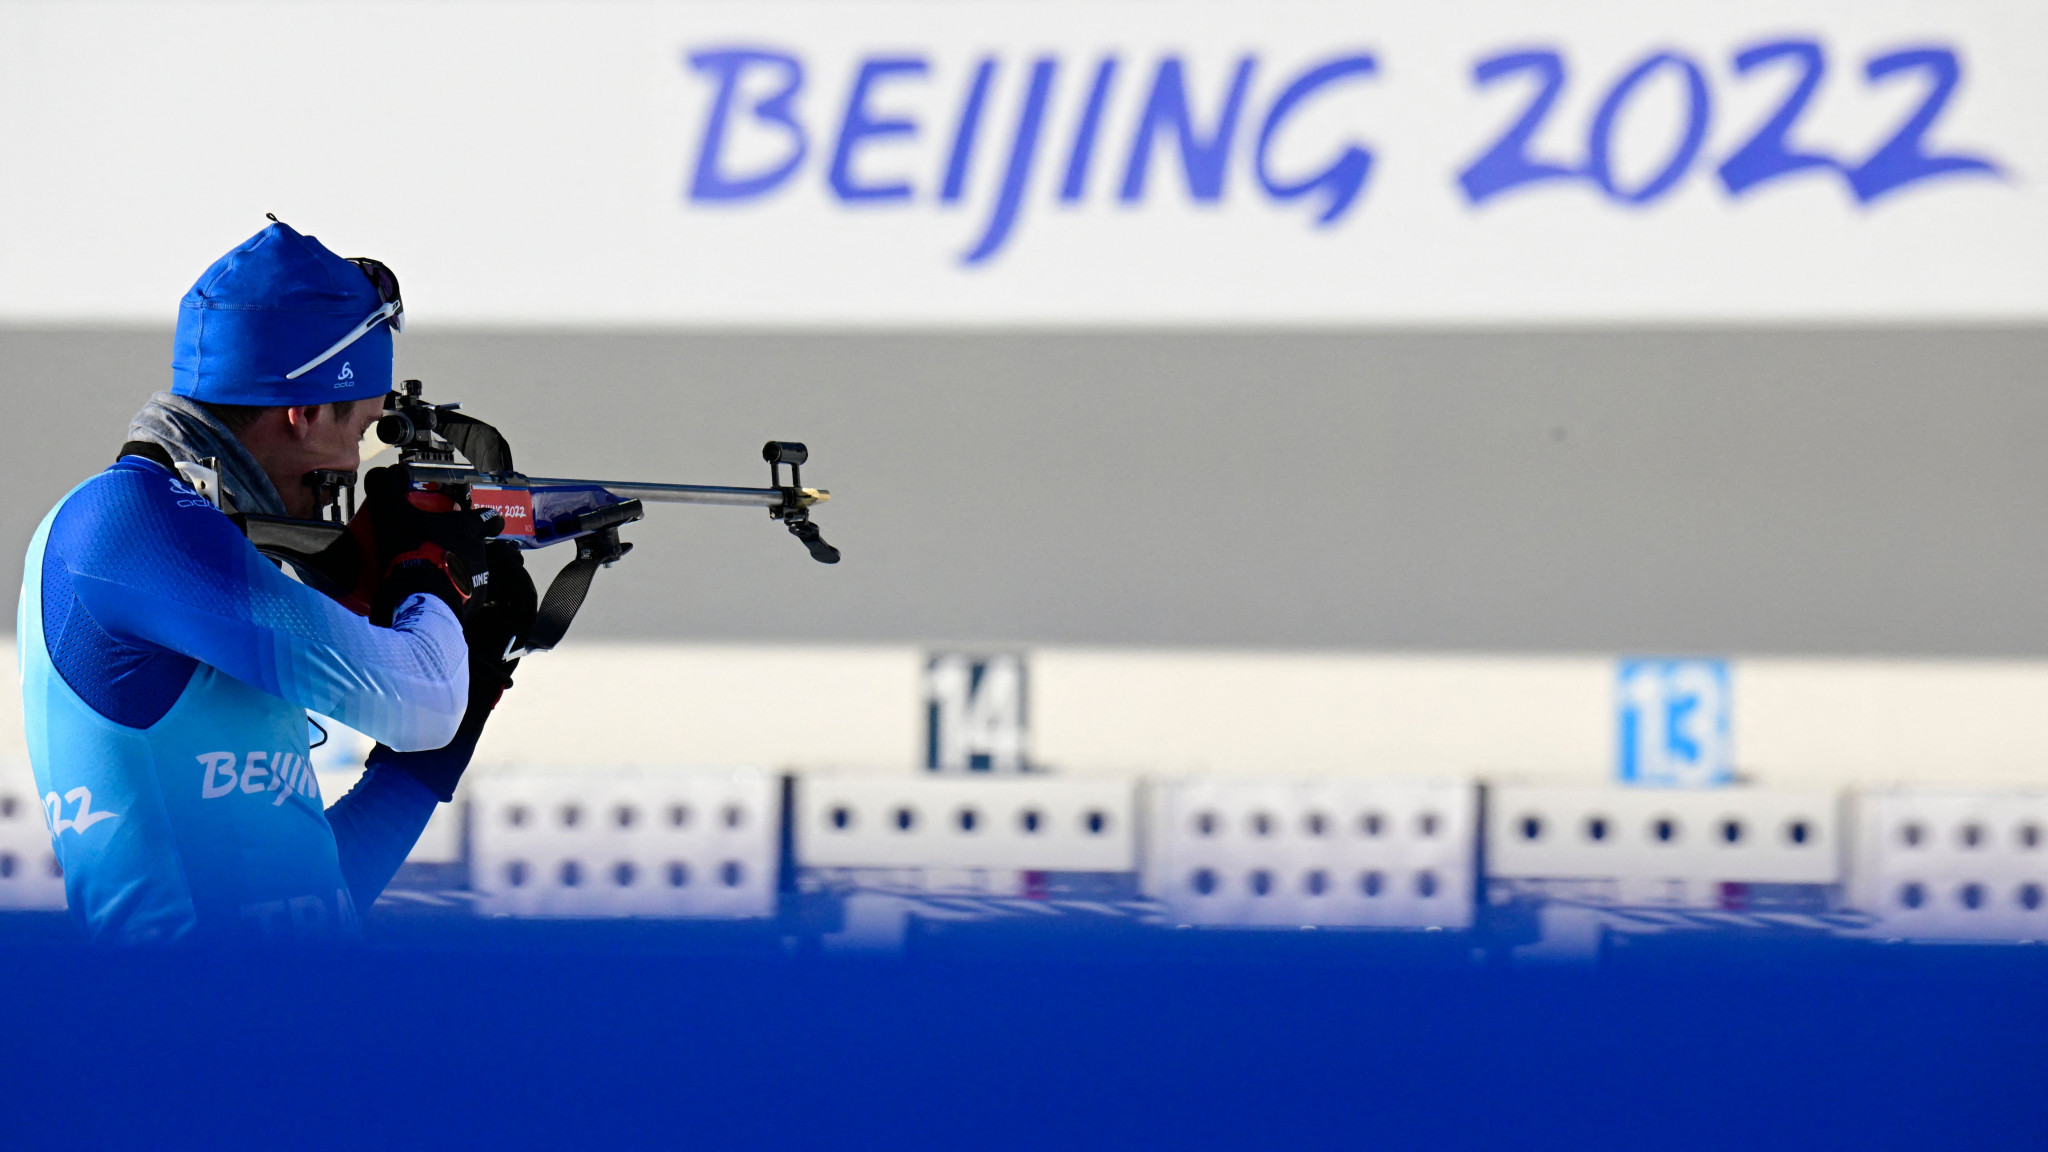 Biathlon World Cup leaders aiming for first Olympic gold medal glory at Beijing 2022